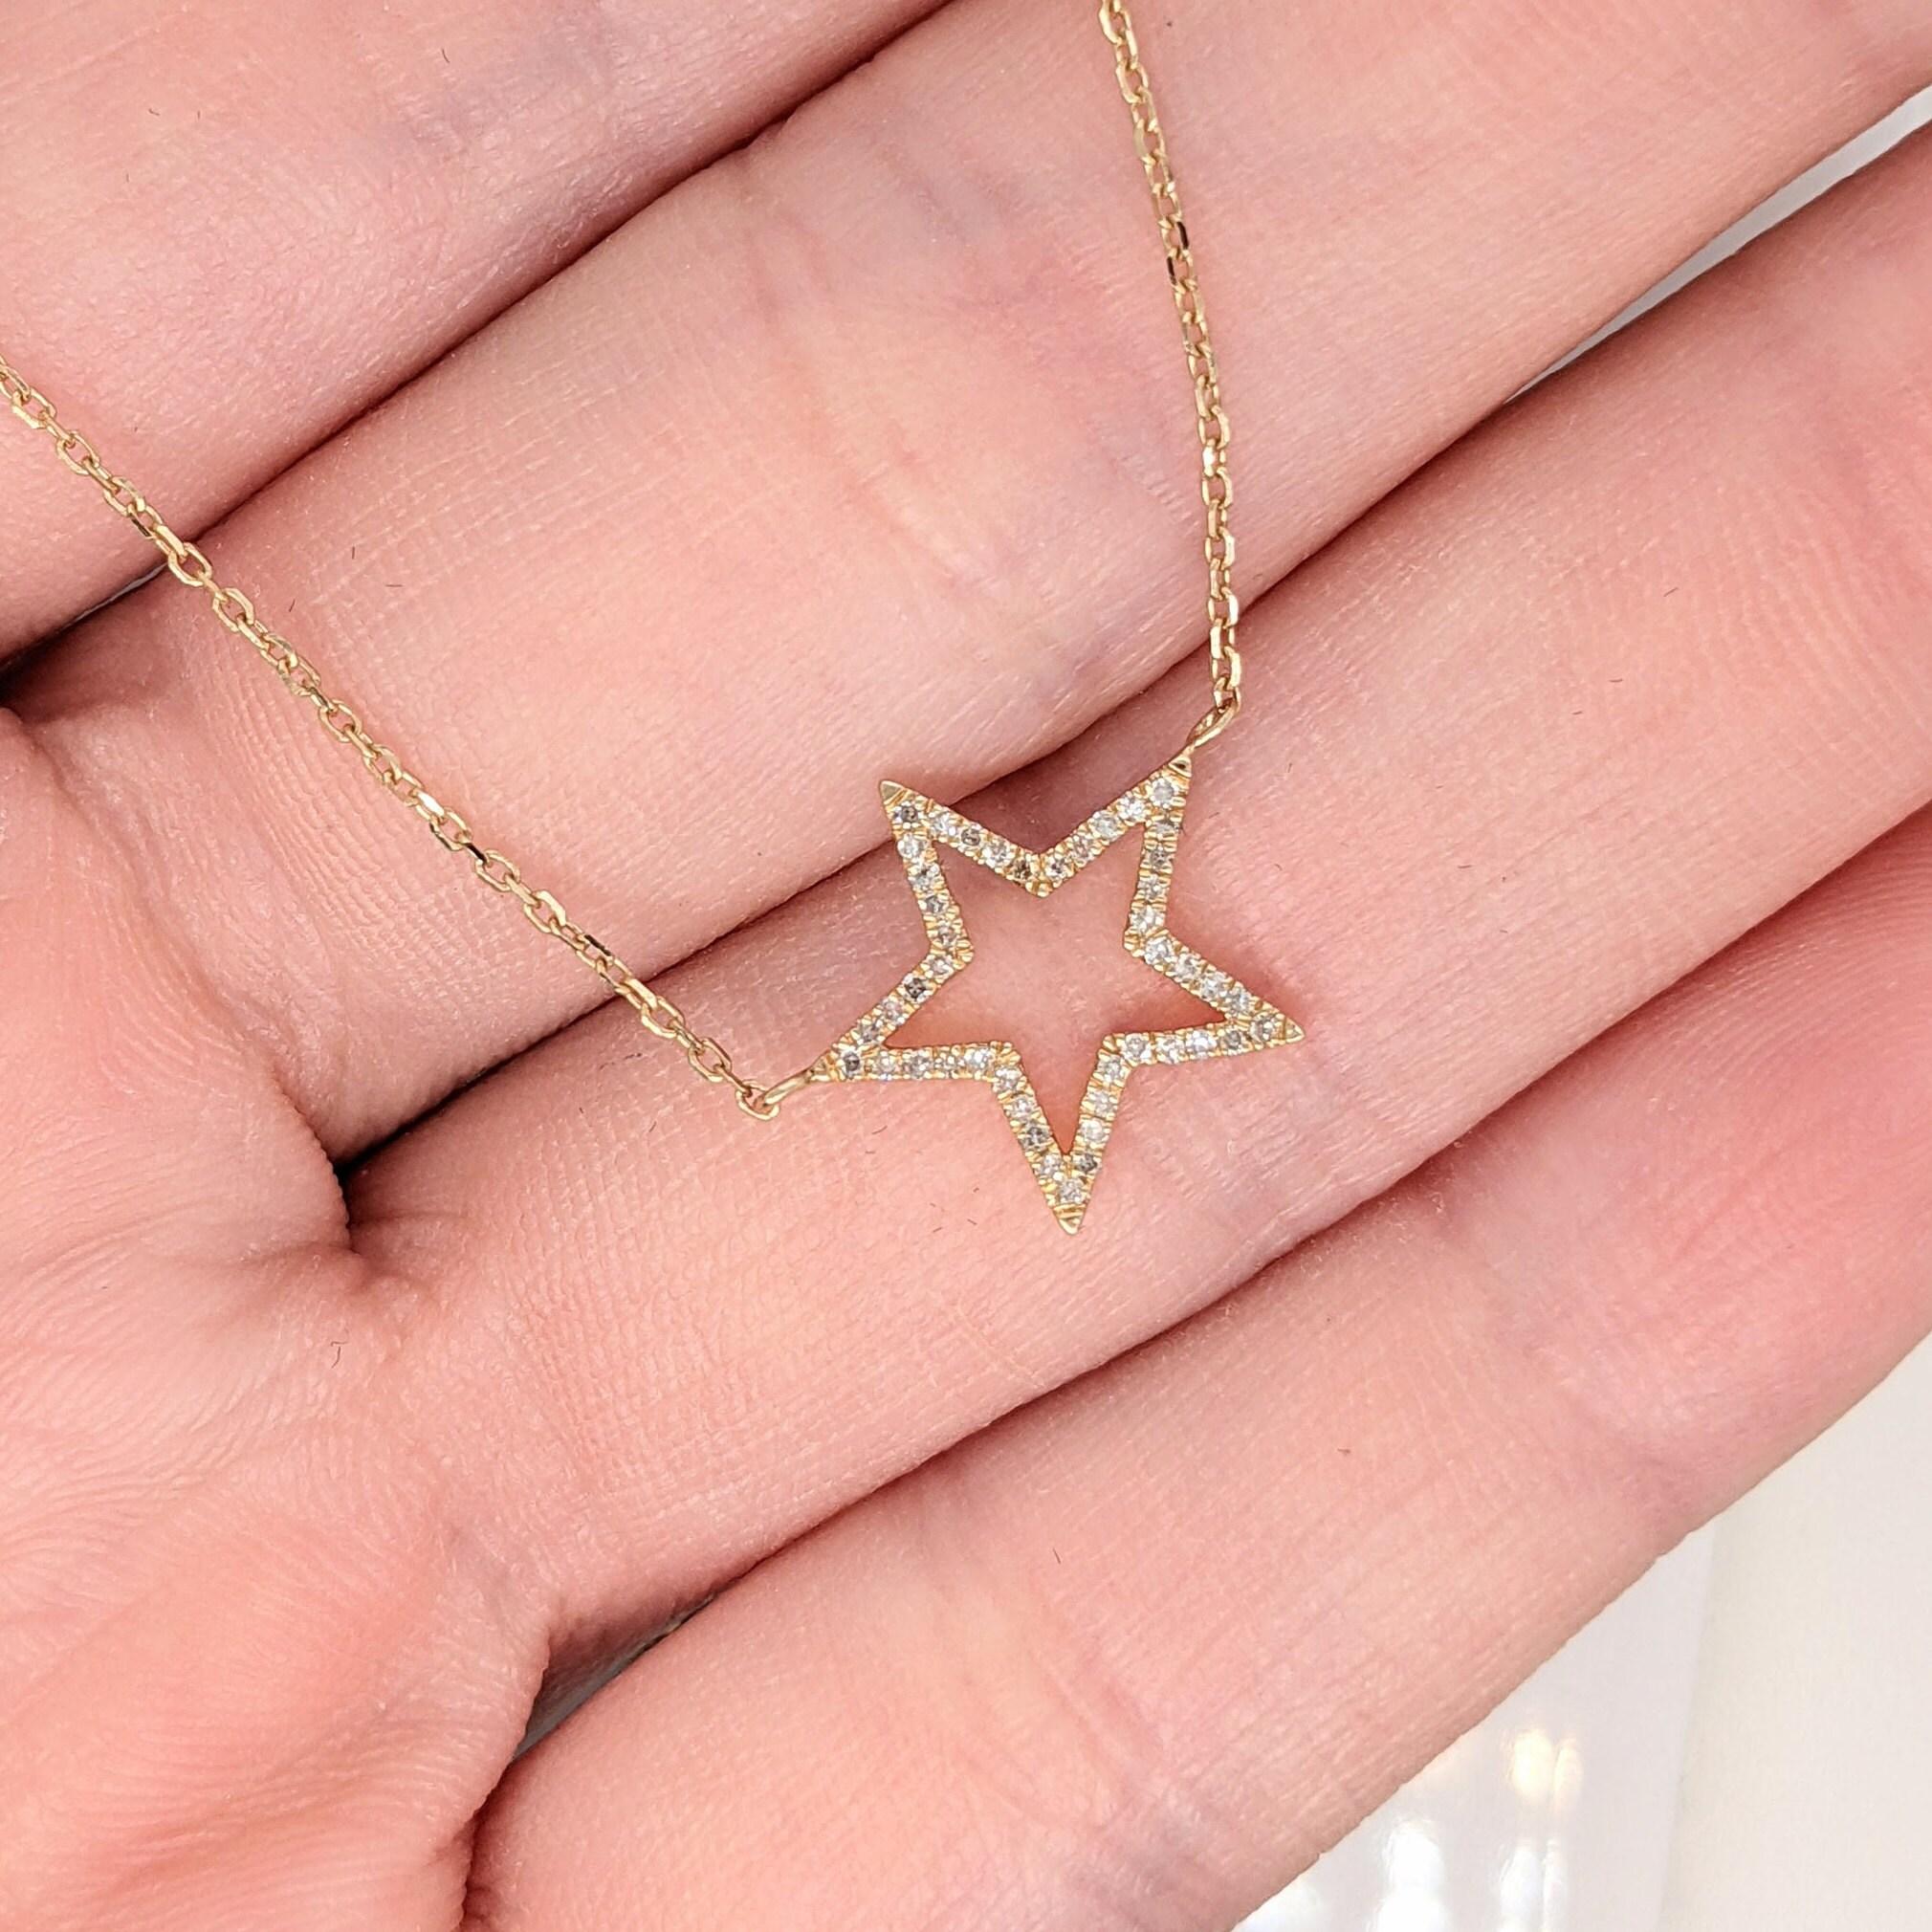 Pretty Star Necklace in Solid 14k Gold with Natural Diamond Accents